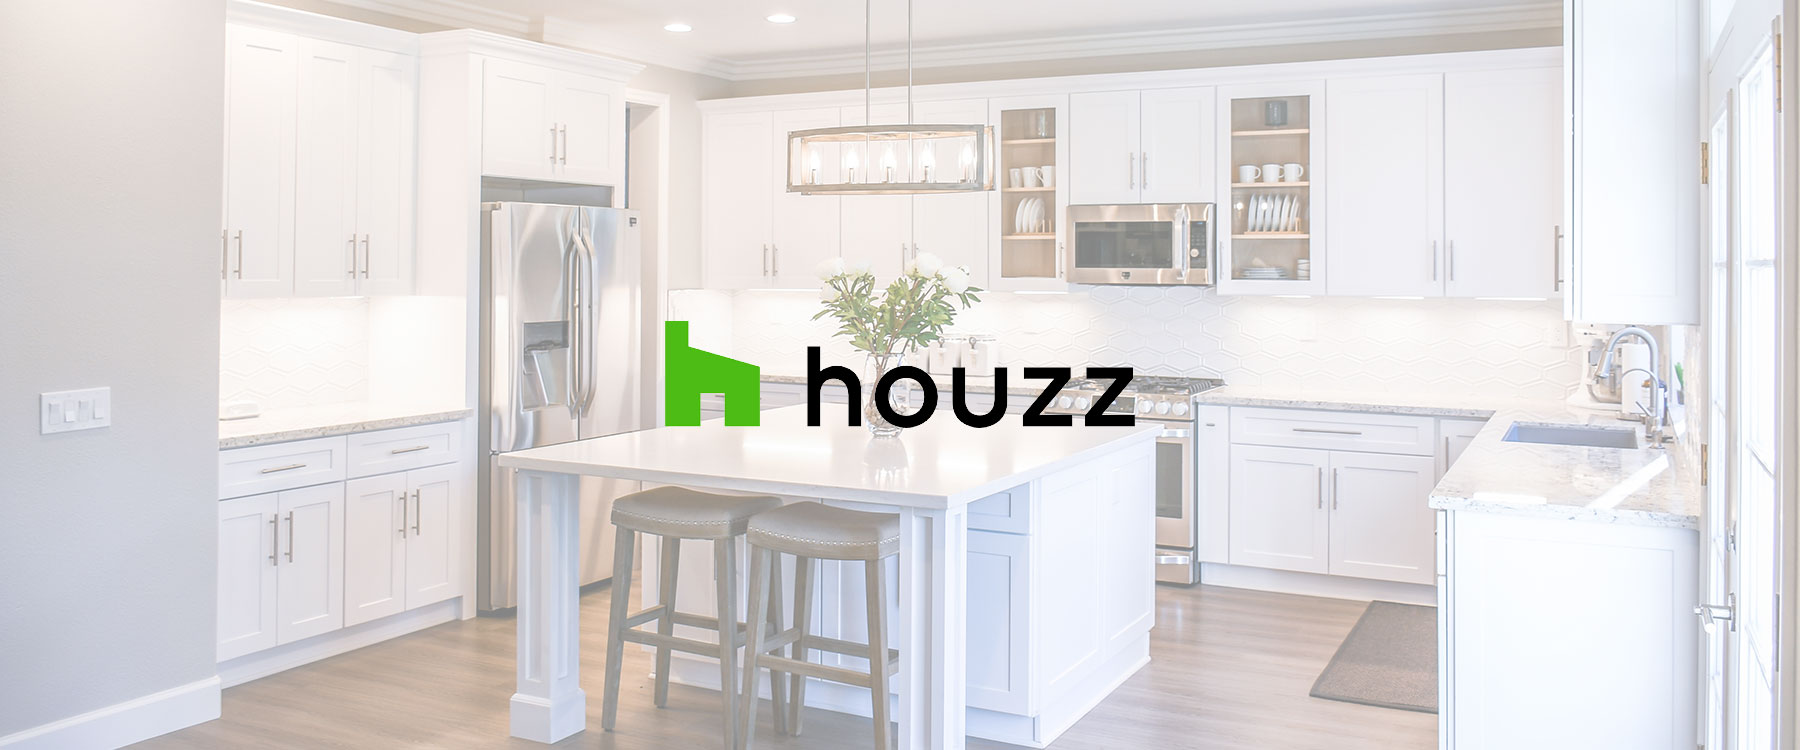 houzz promo code first order 2017